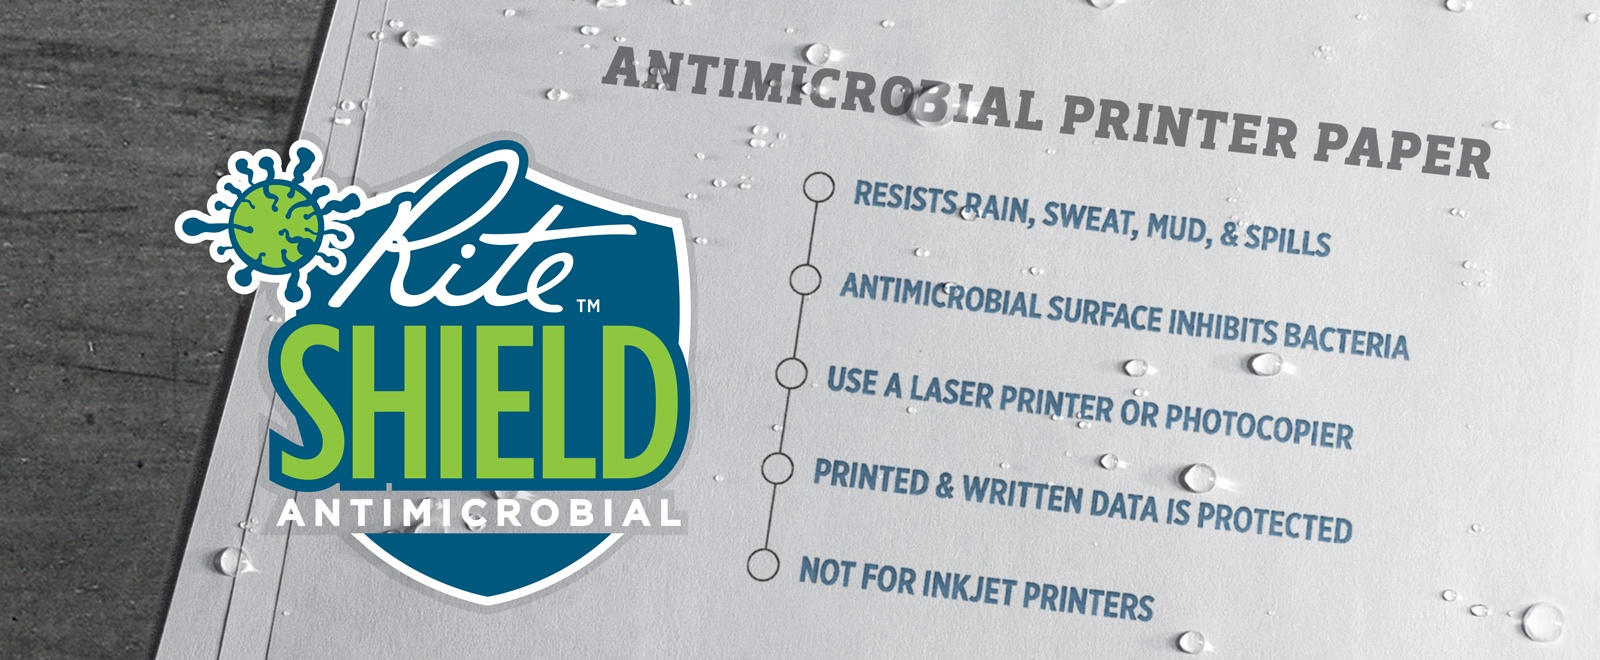 Rite Shield Antimicrobial Printer Paper: resists moisture and inhibits bacteria